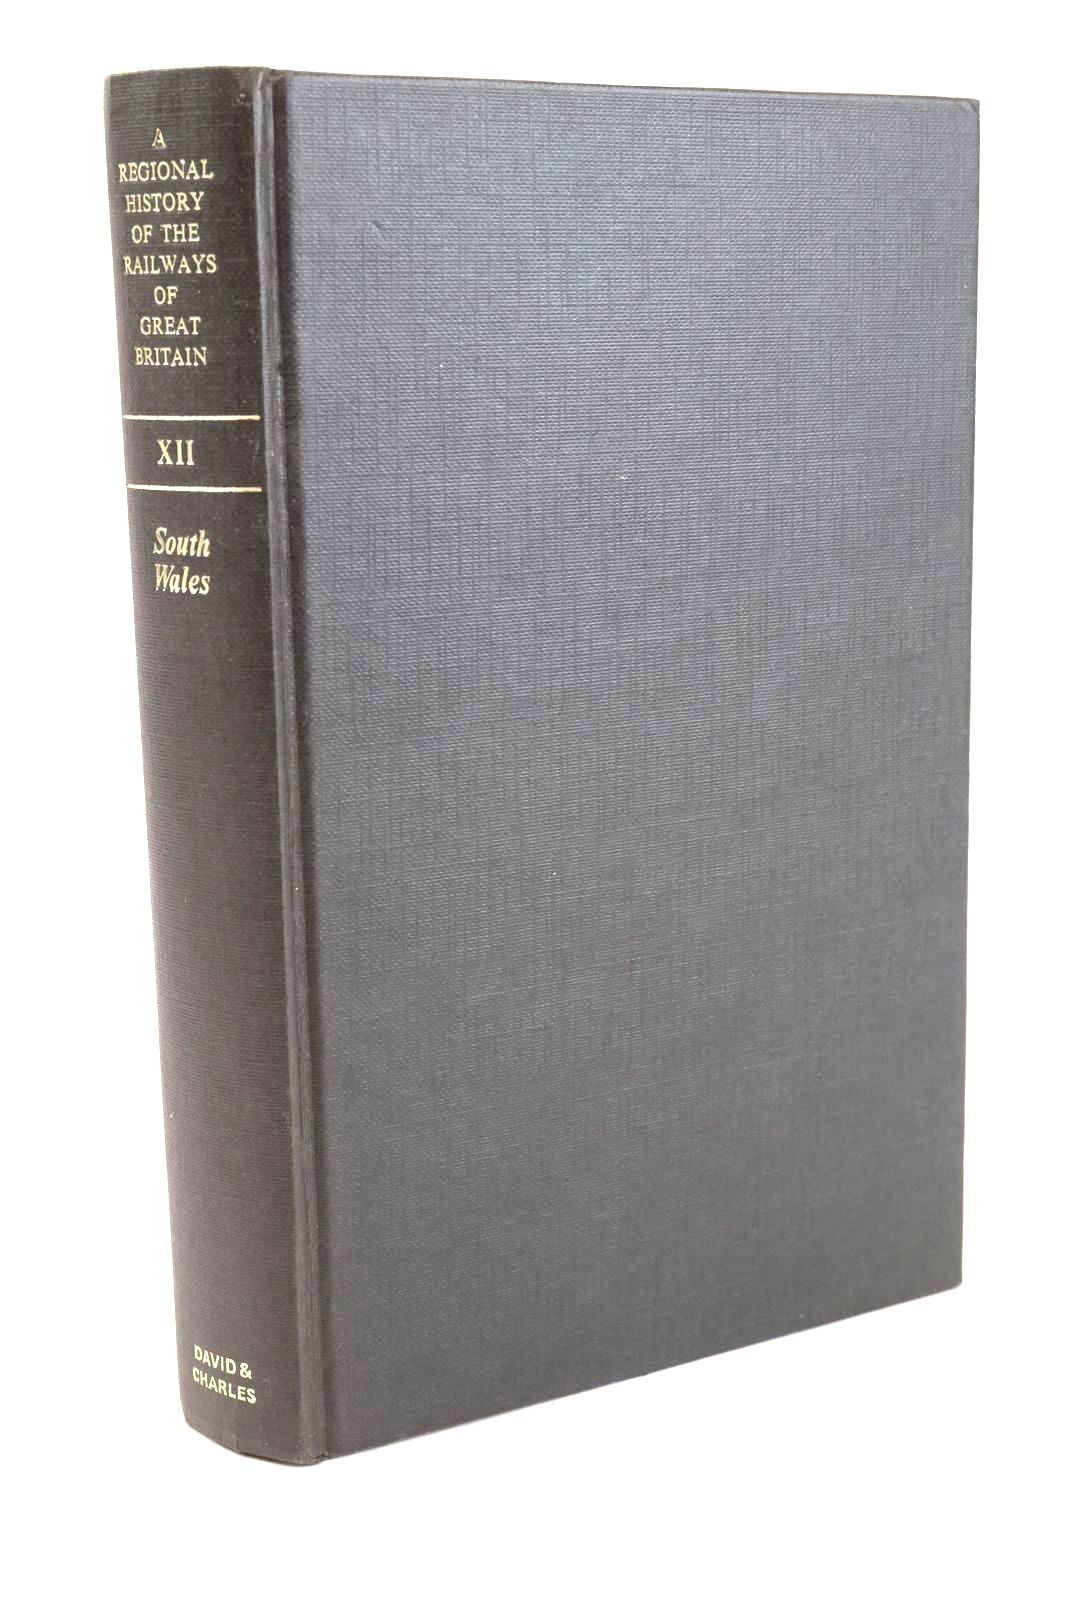 Photo of A REGIONAL HISTORY OF THE RAILWAYS OF GREAT BRITAIN VOLUME XII SOUTH WALES written by Barrie, D.S.M. published by David &amp; Charles (STOCK CODE: 1327158)  for sale by Stella & Rose's Books